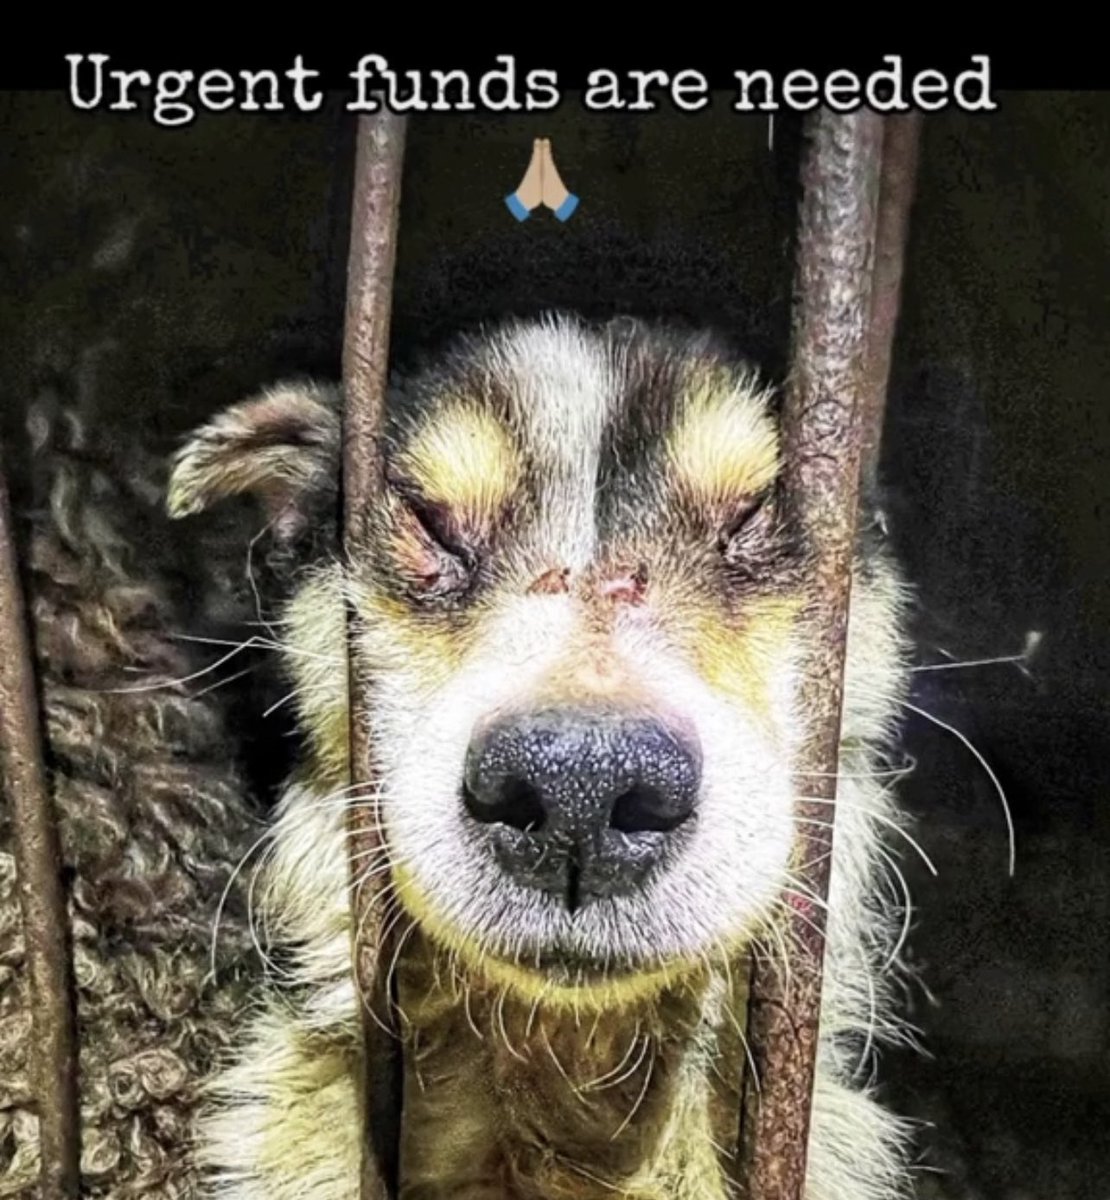 We are in active Rescue Response and will be keeping you all updated!! Thank you so much for your support. Together we can end this cruelty 🙏🏼

Please help 🙏🏻 bit.ly/NDLBSaveLives

#EndYulin #SaveDogs #EndTheCruelty #AnimalRescue #stopanimalcruelty #stopdogmeat #EndDogMeat